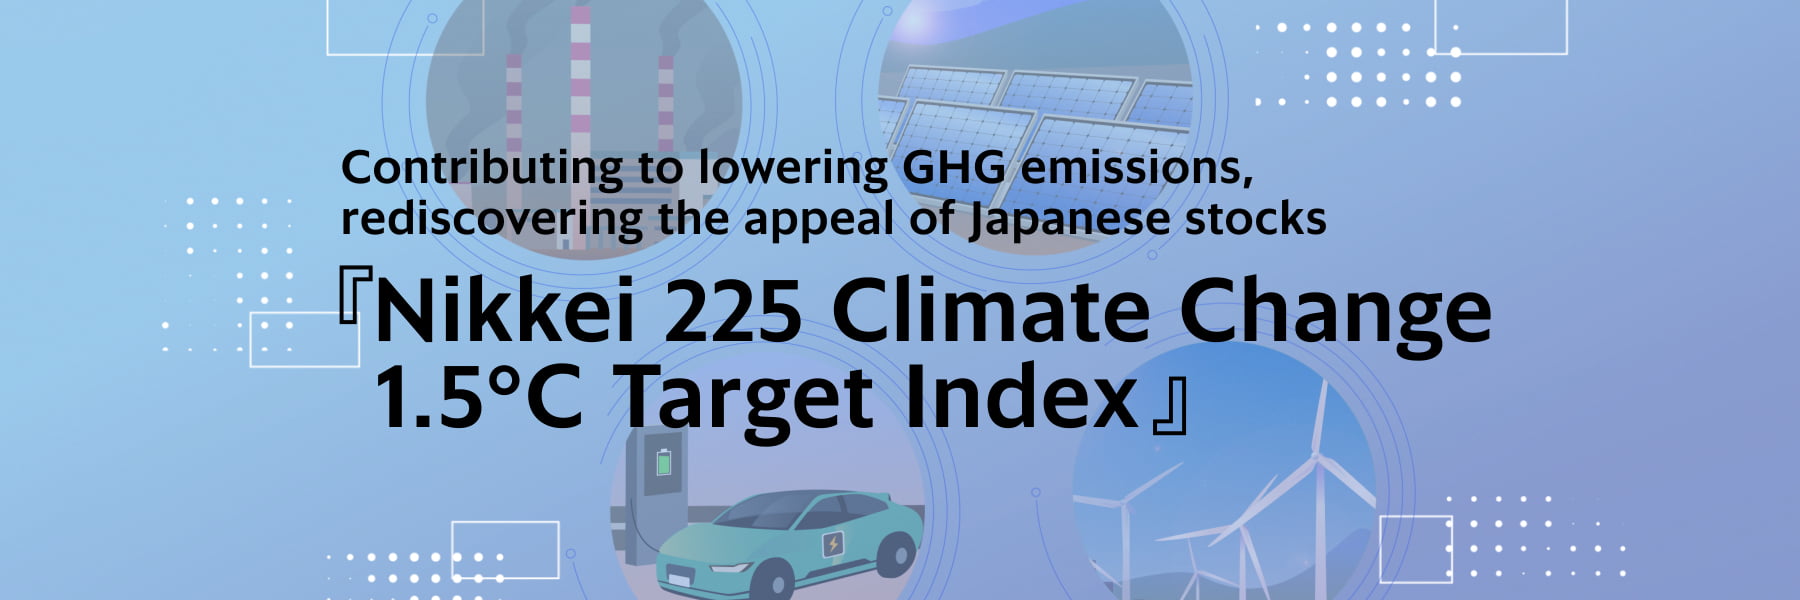 Contributing to lowering GHG emissions, rediscovering the appeal of Japanese stocks 『Nikkei 225 Climate Change 1.5℃ Target Index』